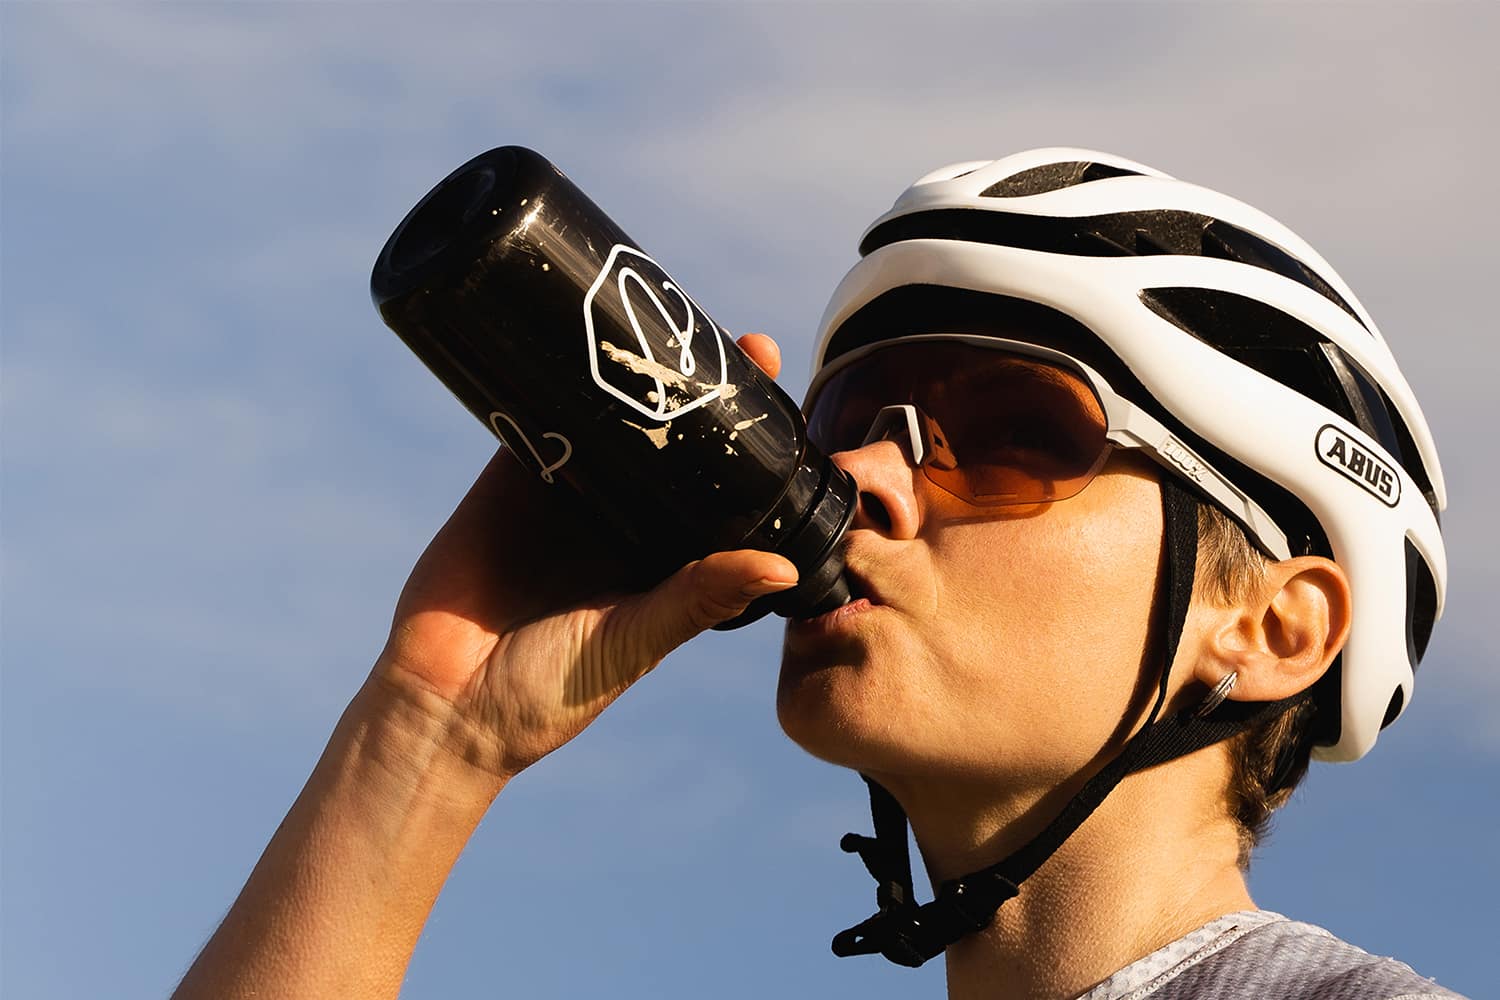 cycling and drinking Veloforte bottle